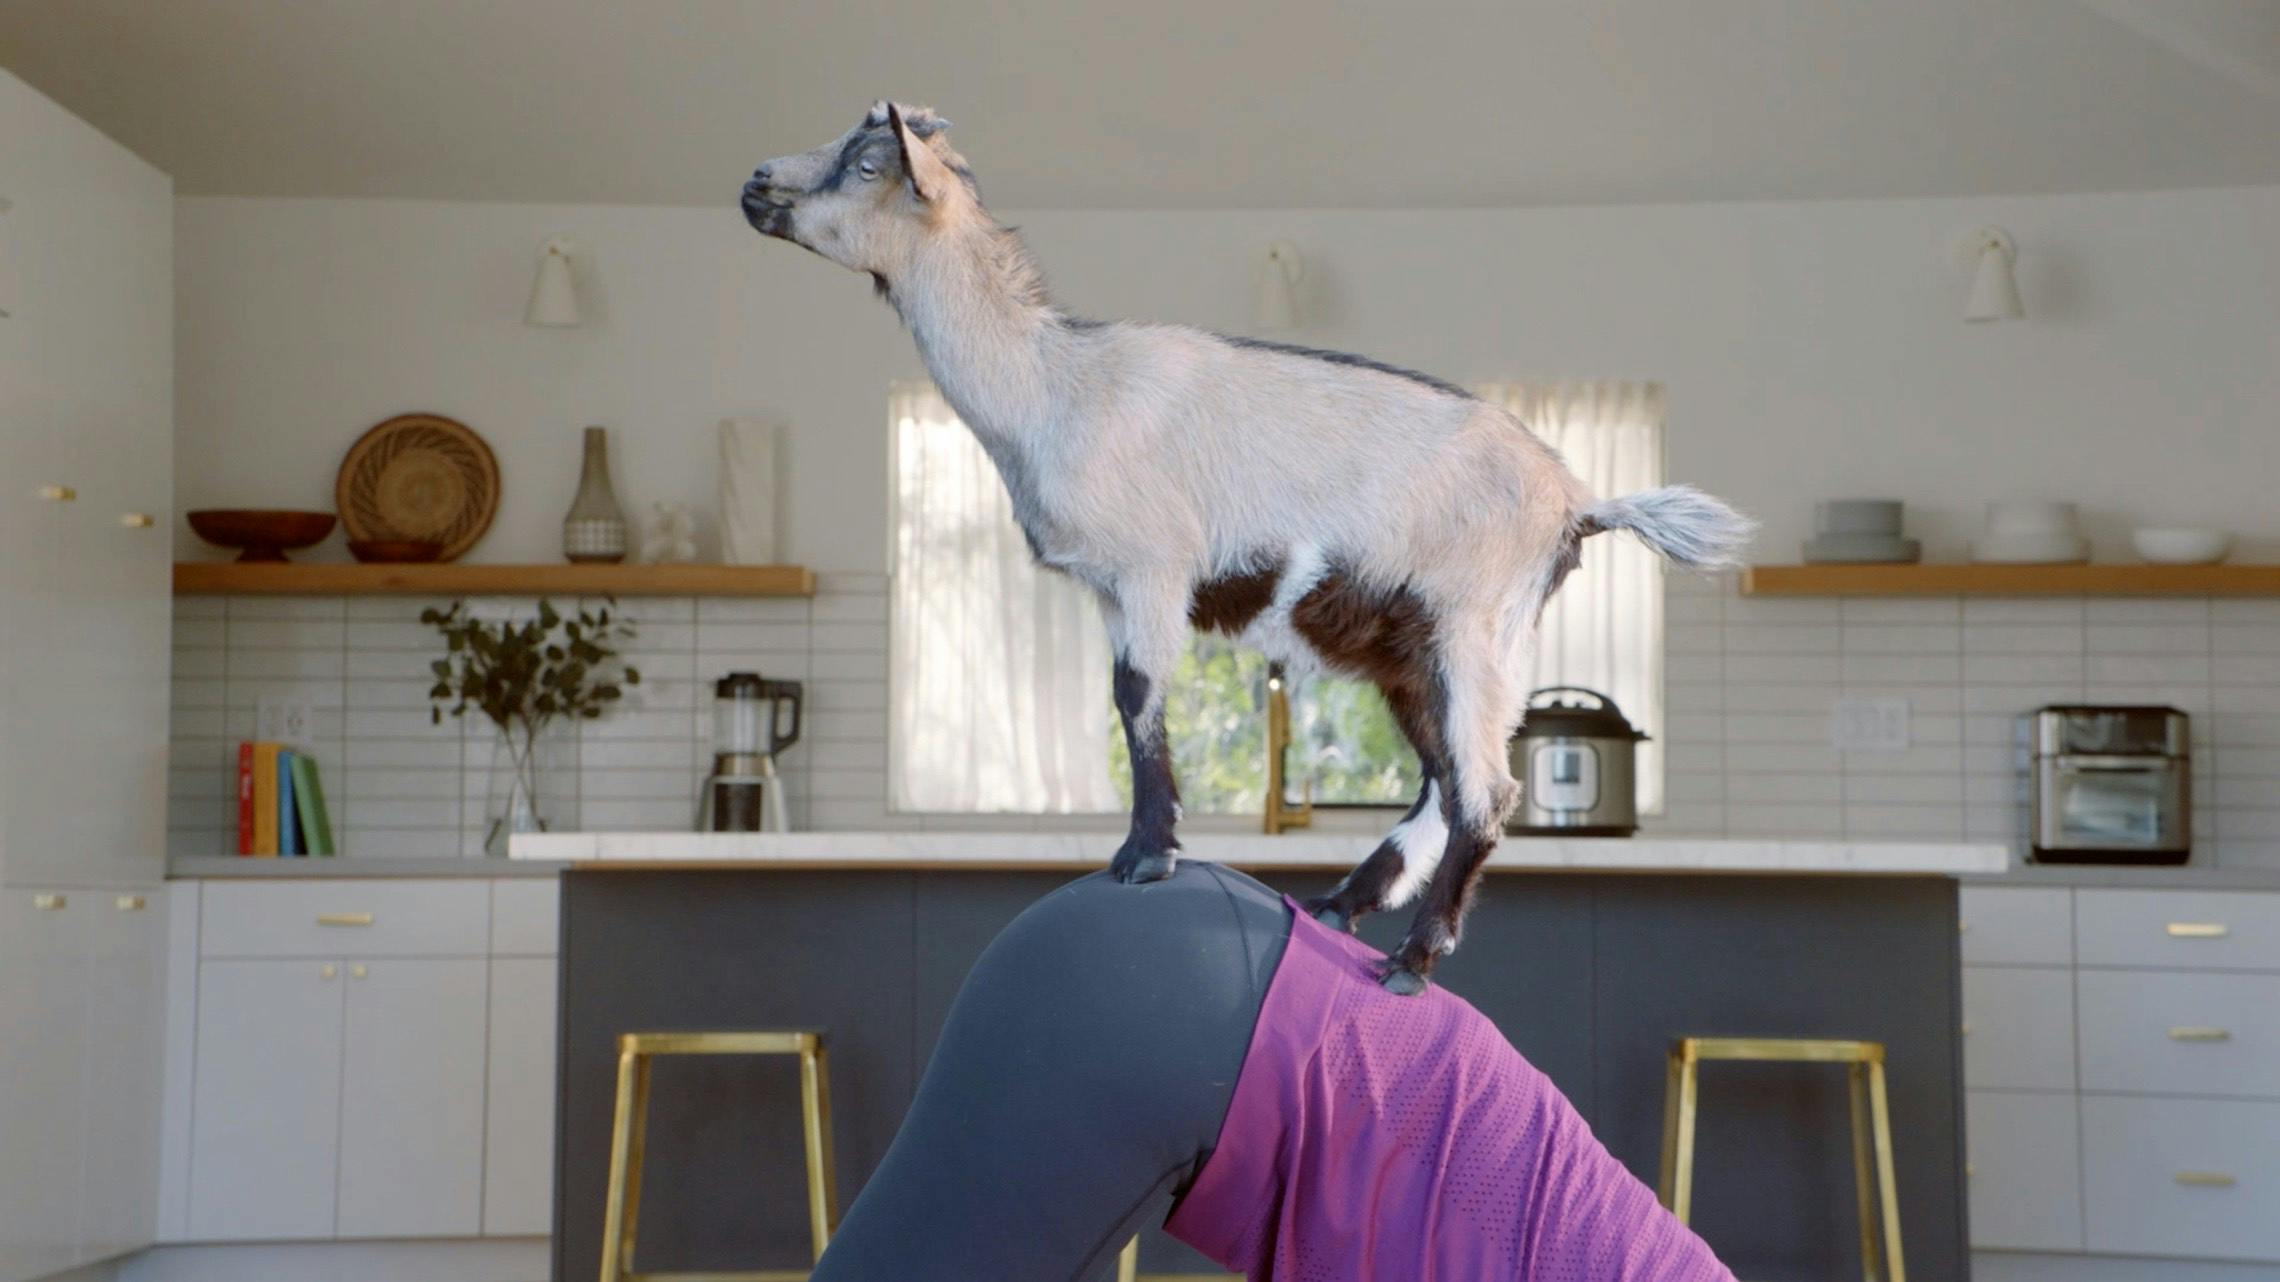 Photograph of a goat standing on a woman's back as she does yoga.